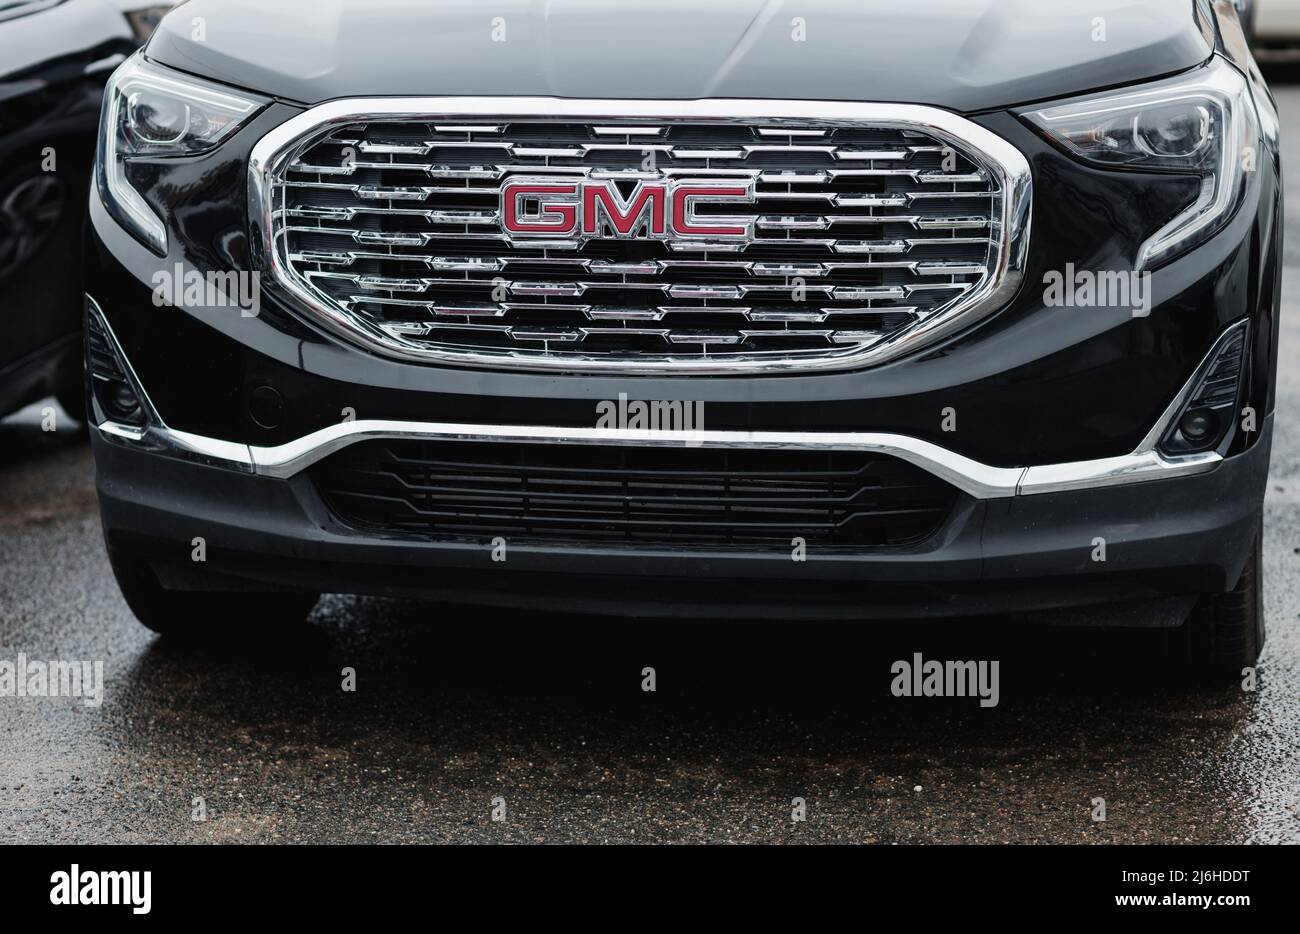 Minsk belarus, April 2022  - The new luxury  GMC car. front view. auto headlights Stock Photo